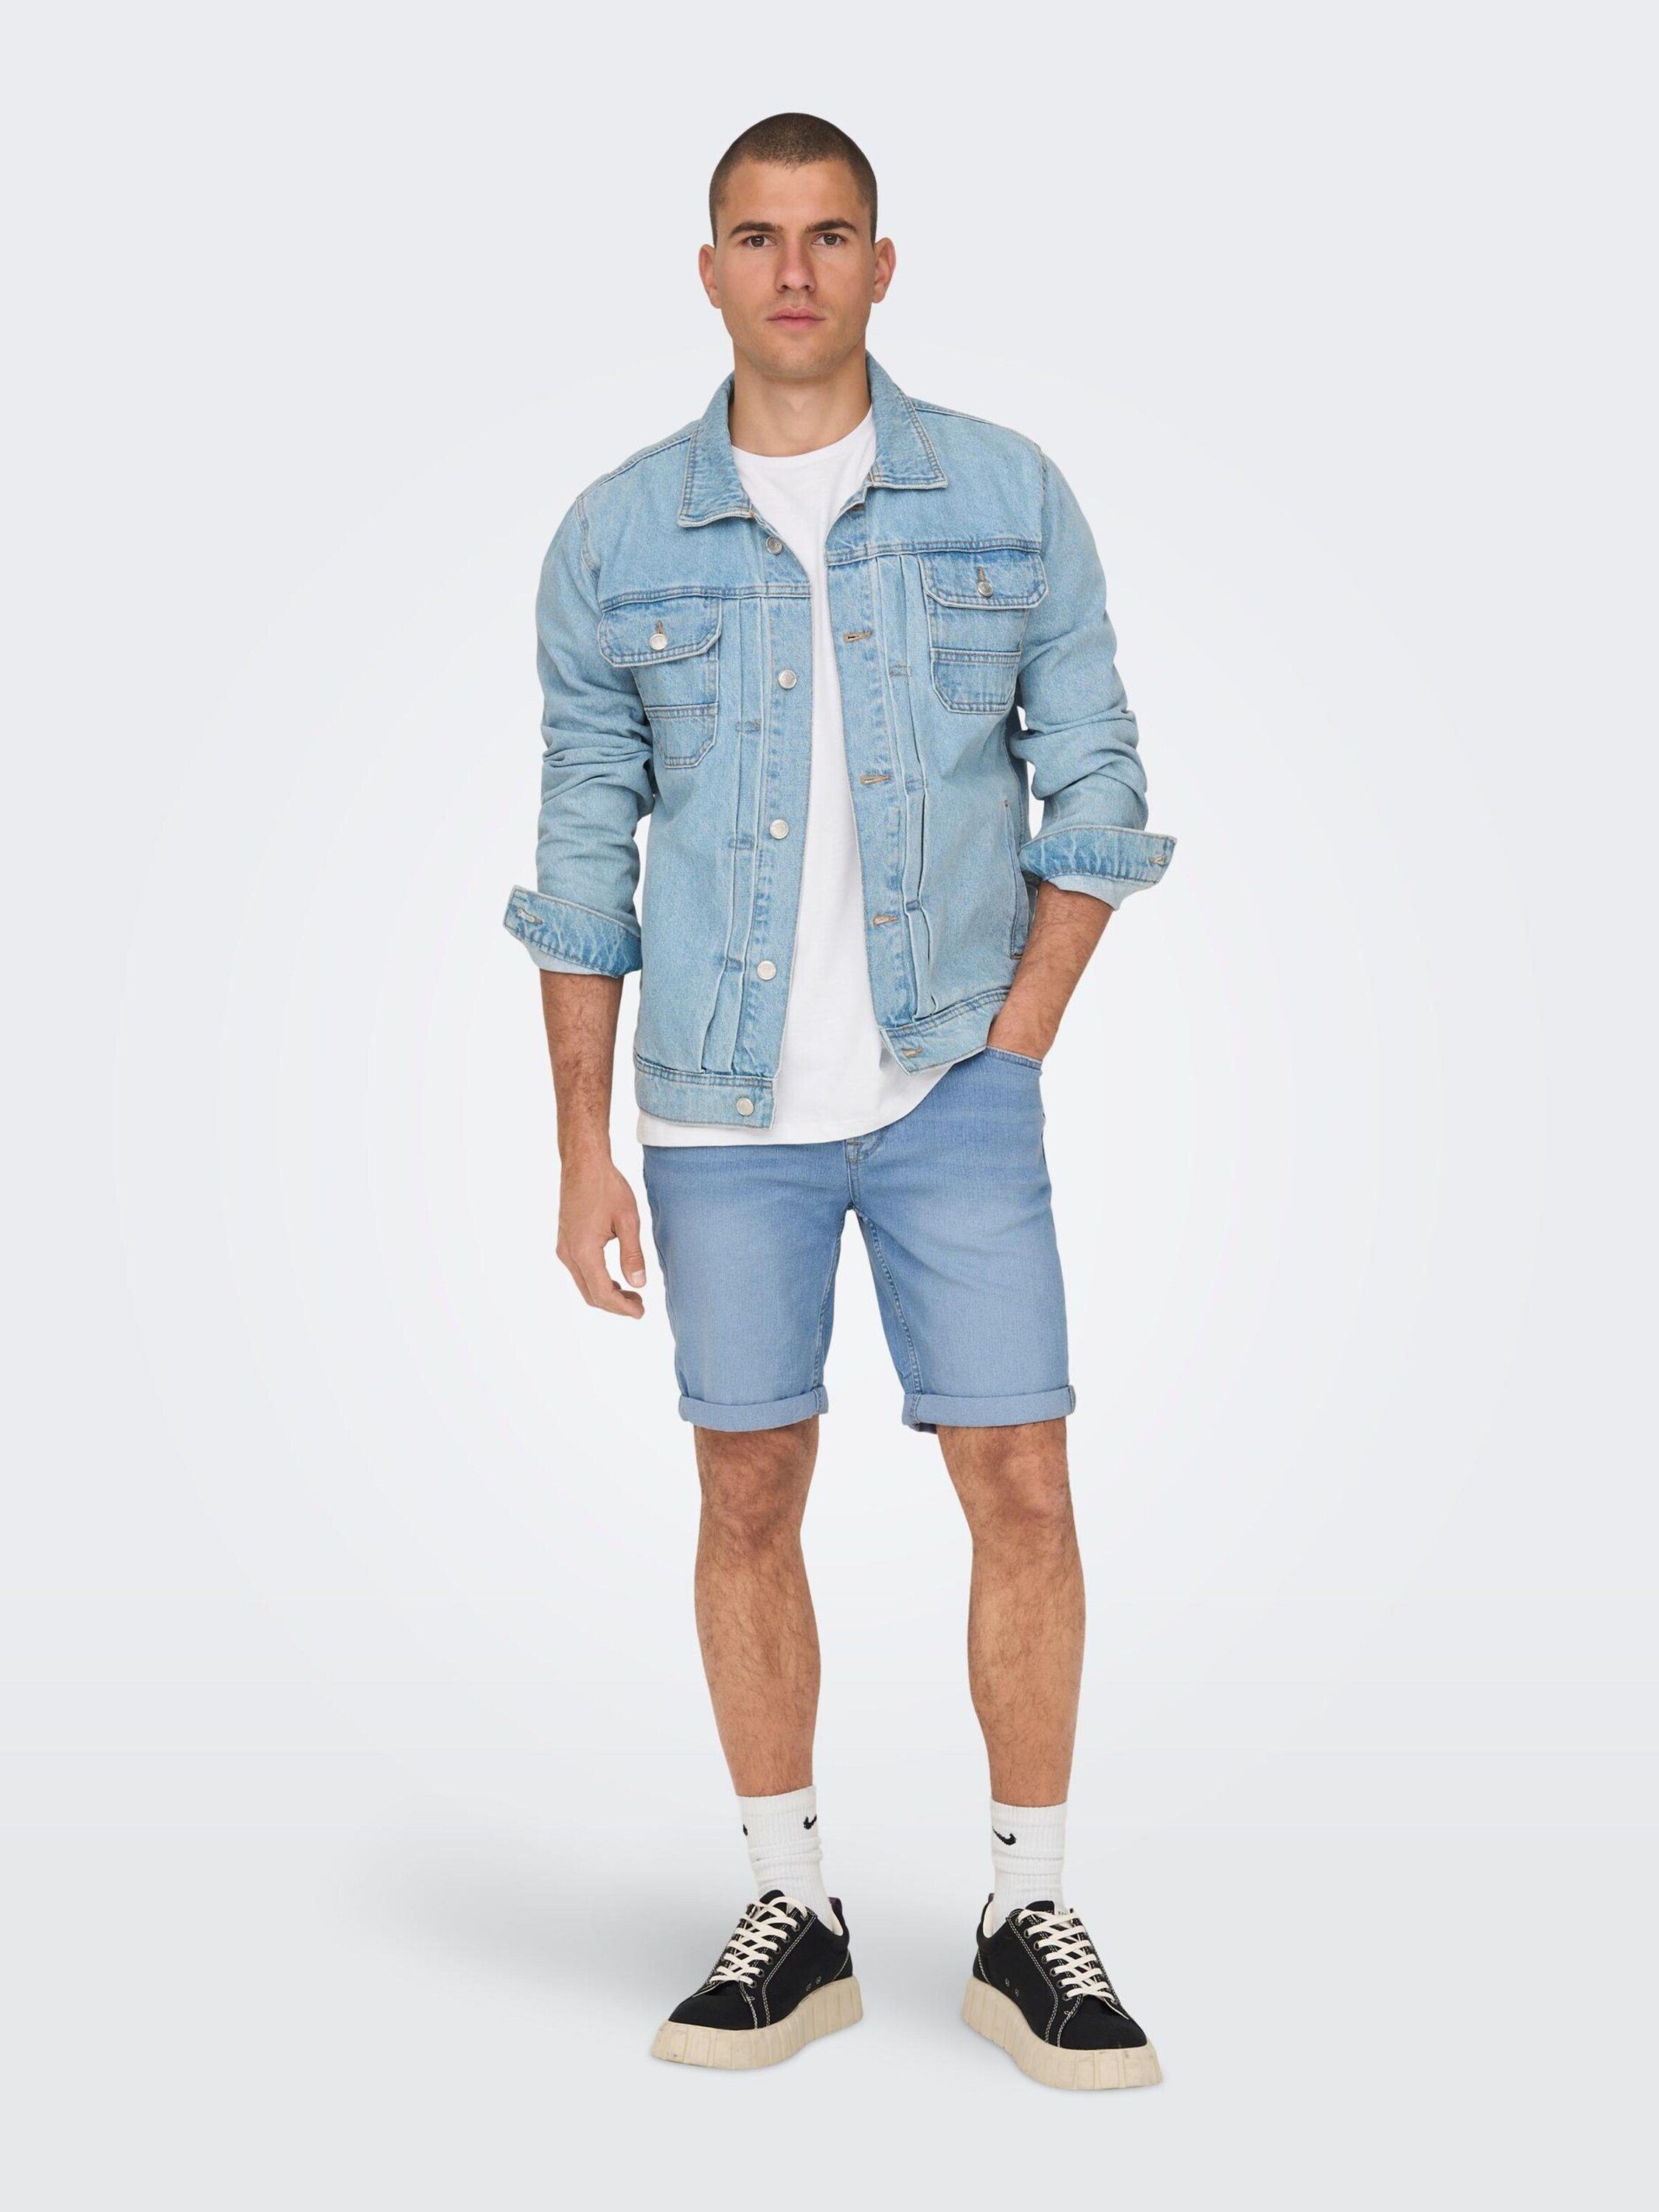 & Ply Jeansshorts ONLY SONS (1-tlg)